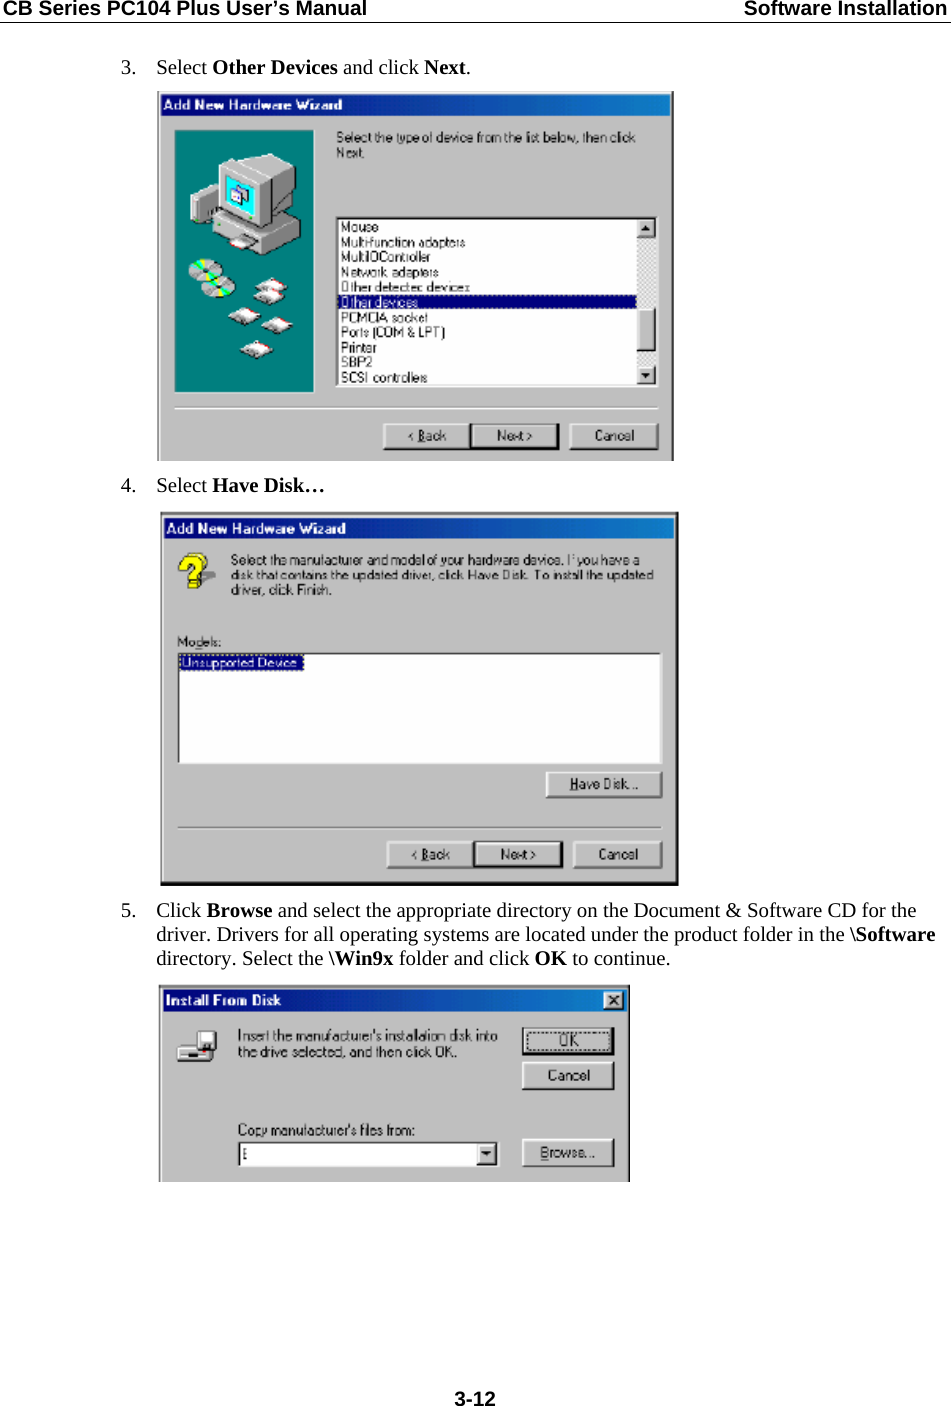 CB Series PC104 Plus User’s Manual  Software Installation 3. Select Other Devices and click Next.  4. Select Have Disk…  5. Click Browse and select the appropriate directory on the Document &amp; Software CD for the driver. Drivers for all operating systems are located under the product folder in the \Software directory. Select the \Win9x folder and click OK to continue.   3-12